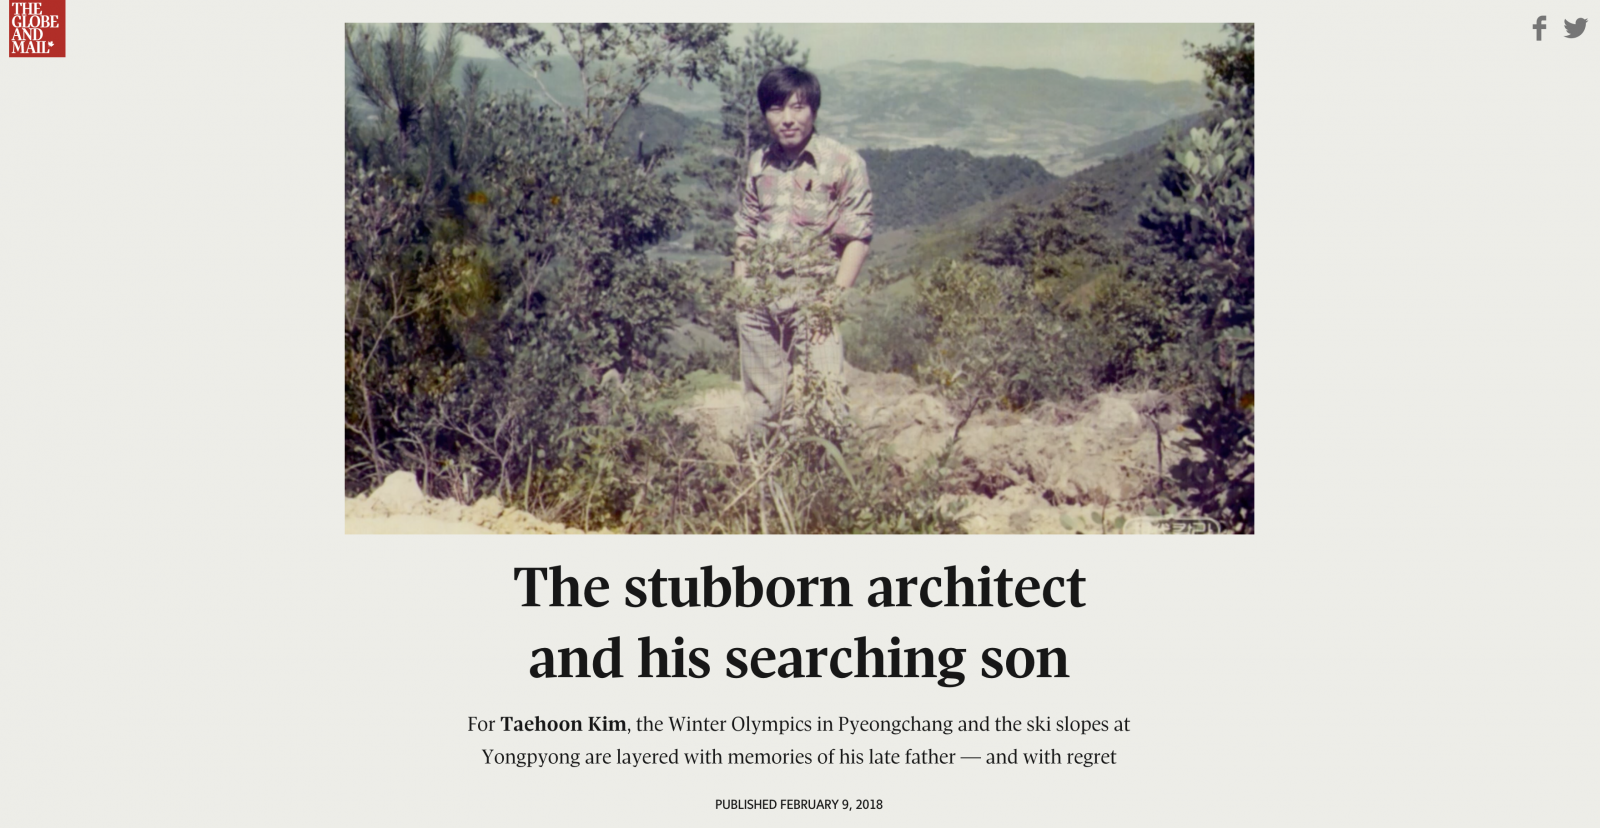  The Stubborn Architect and his Searching Son (The Globe and Mail)